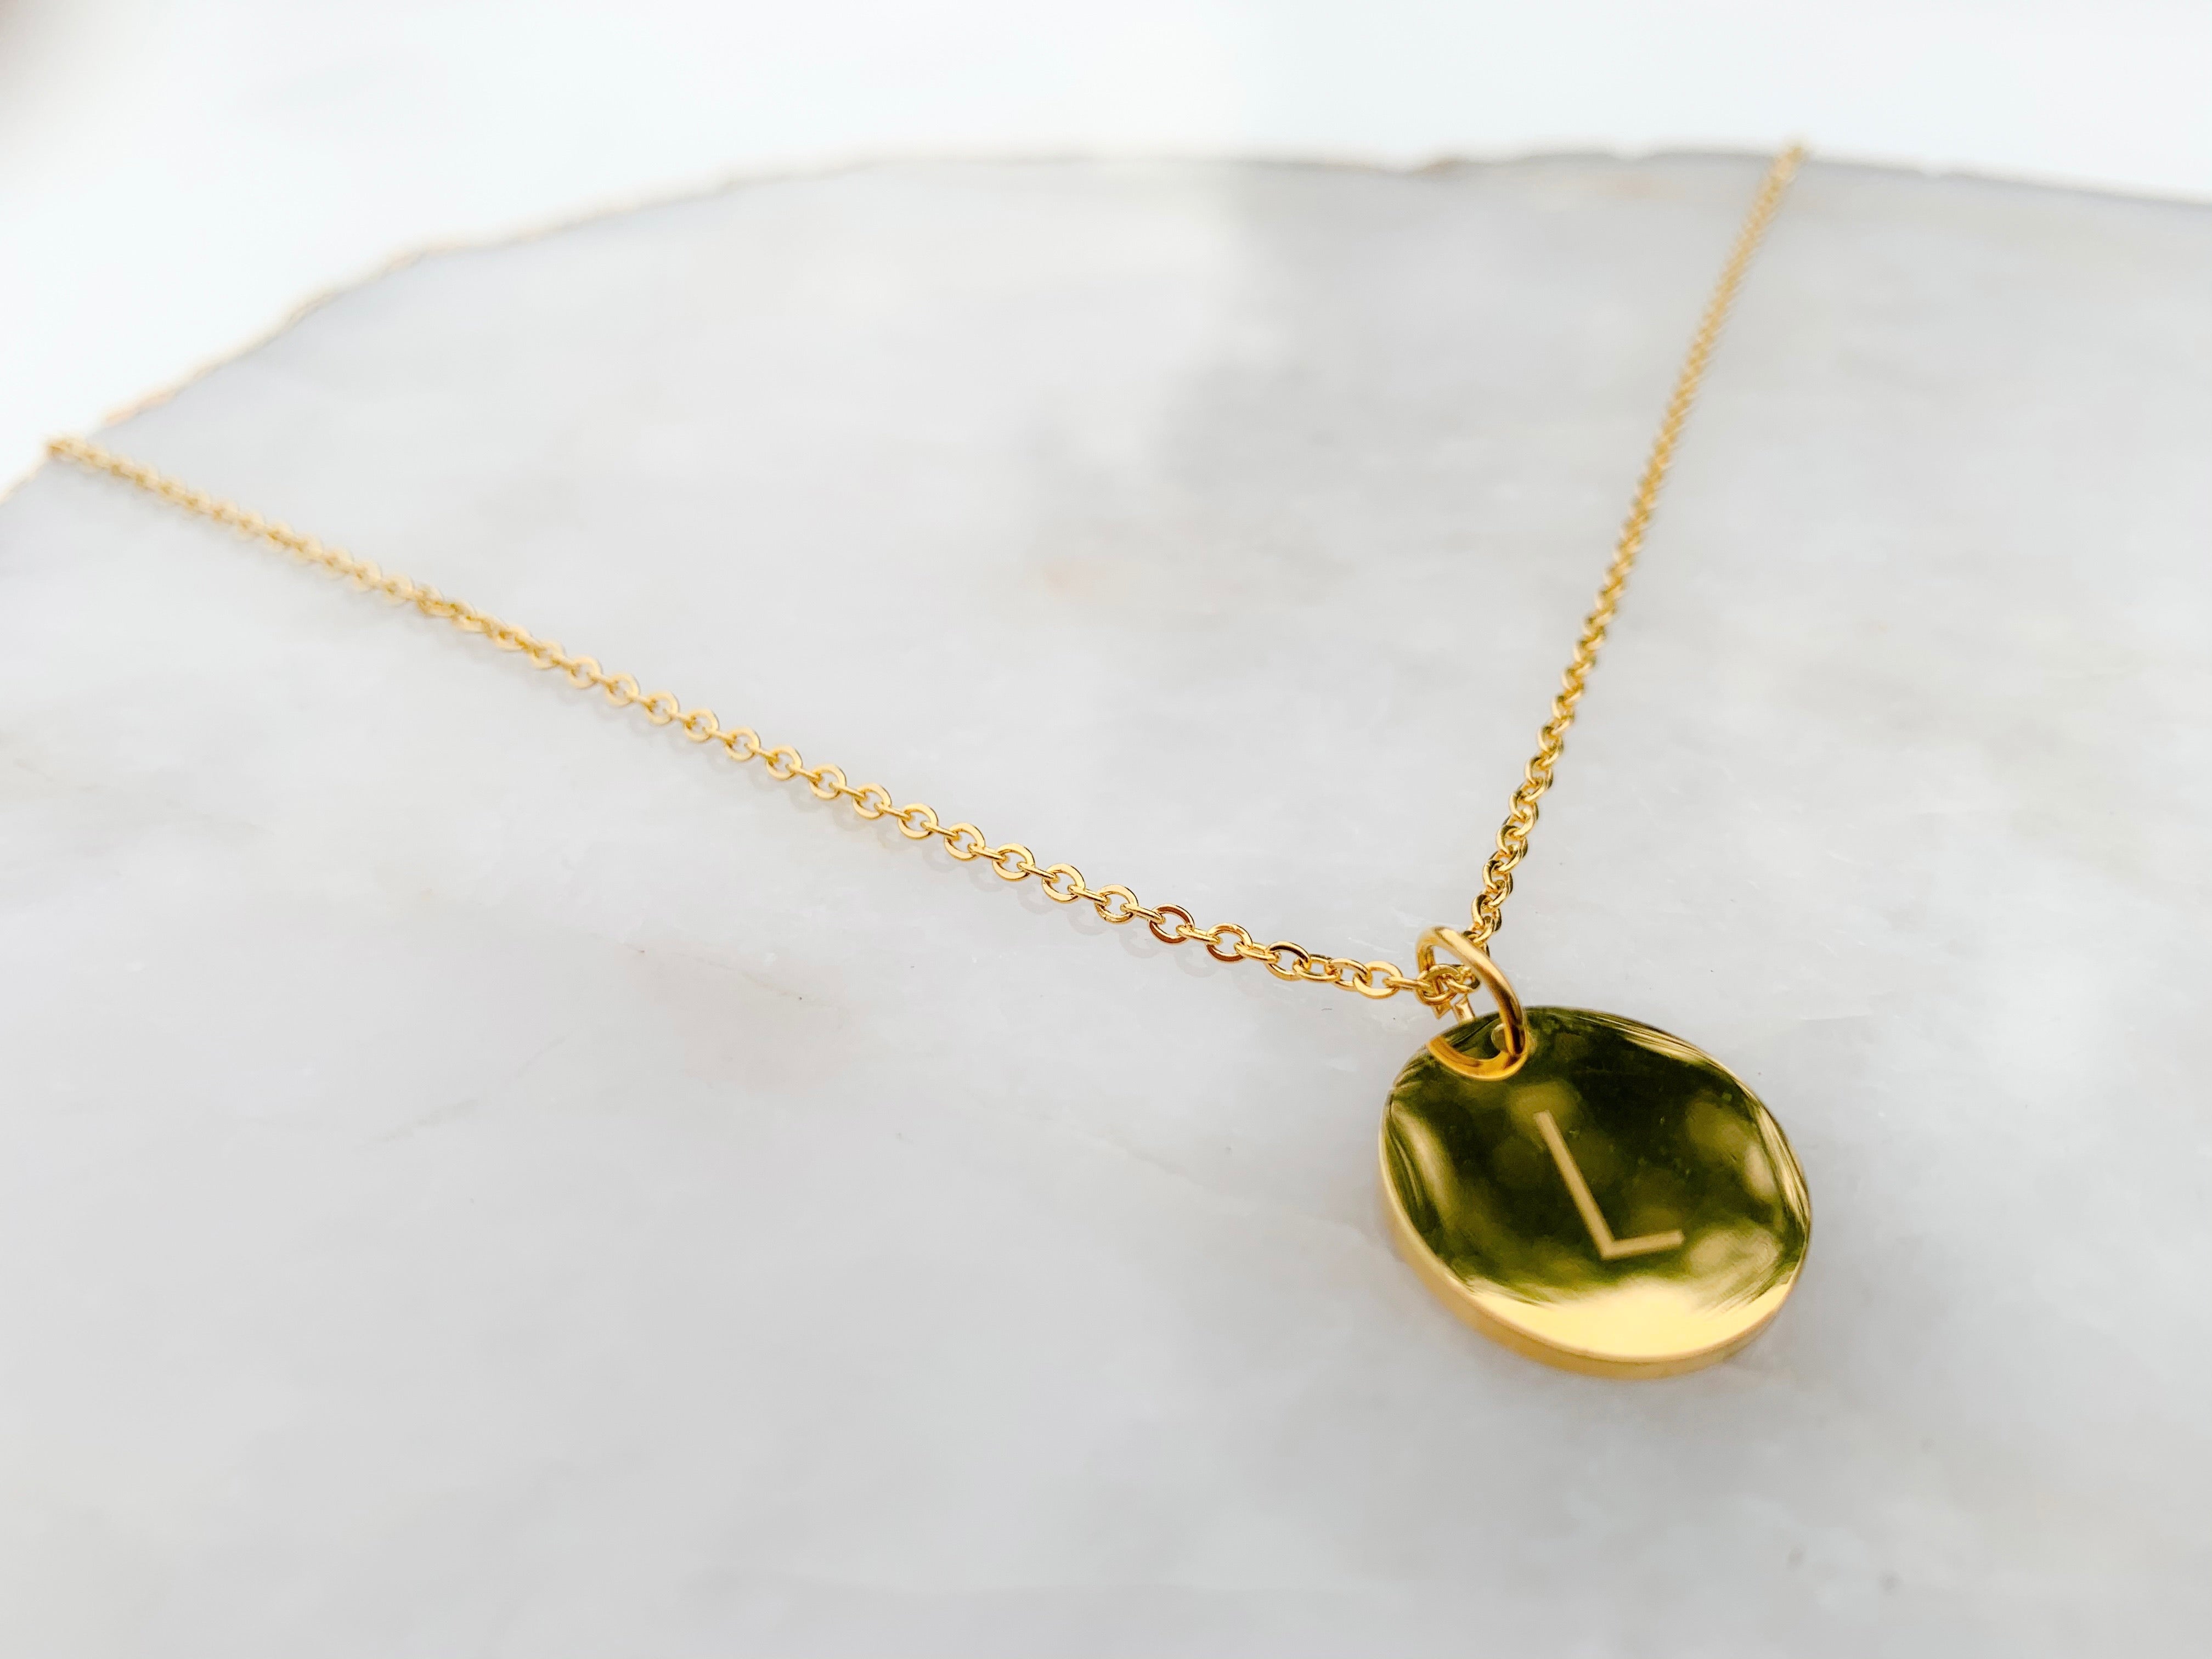 Initial round necklace